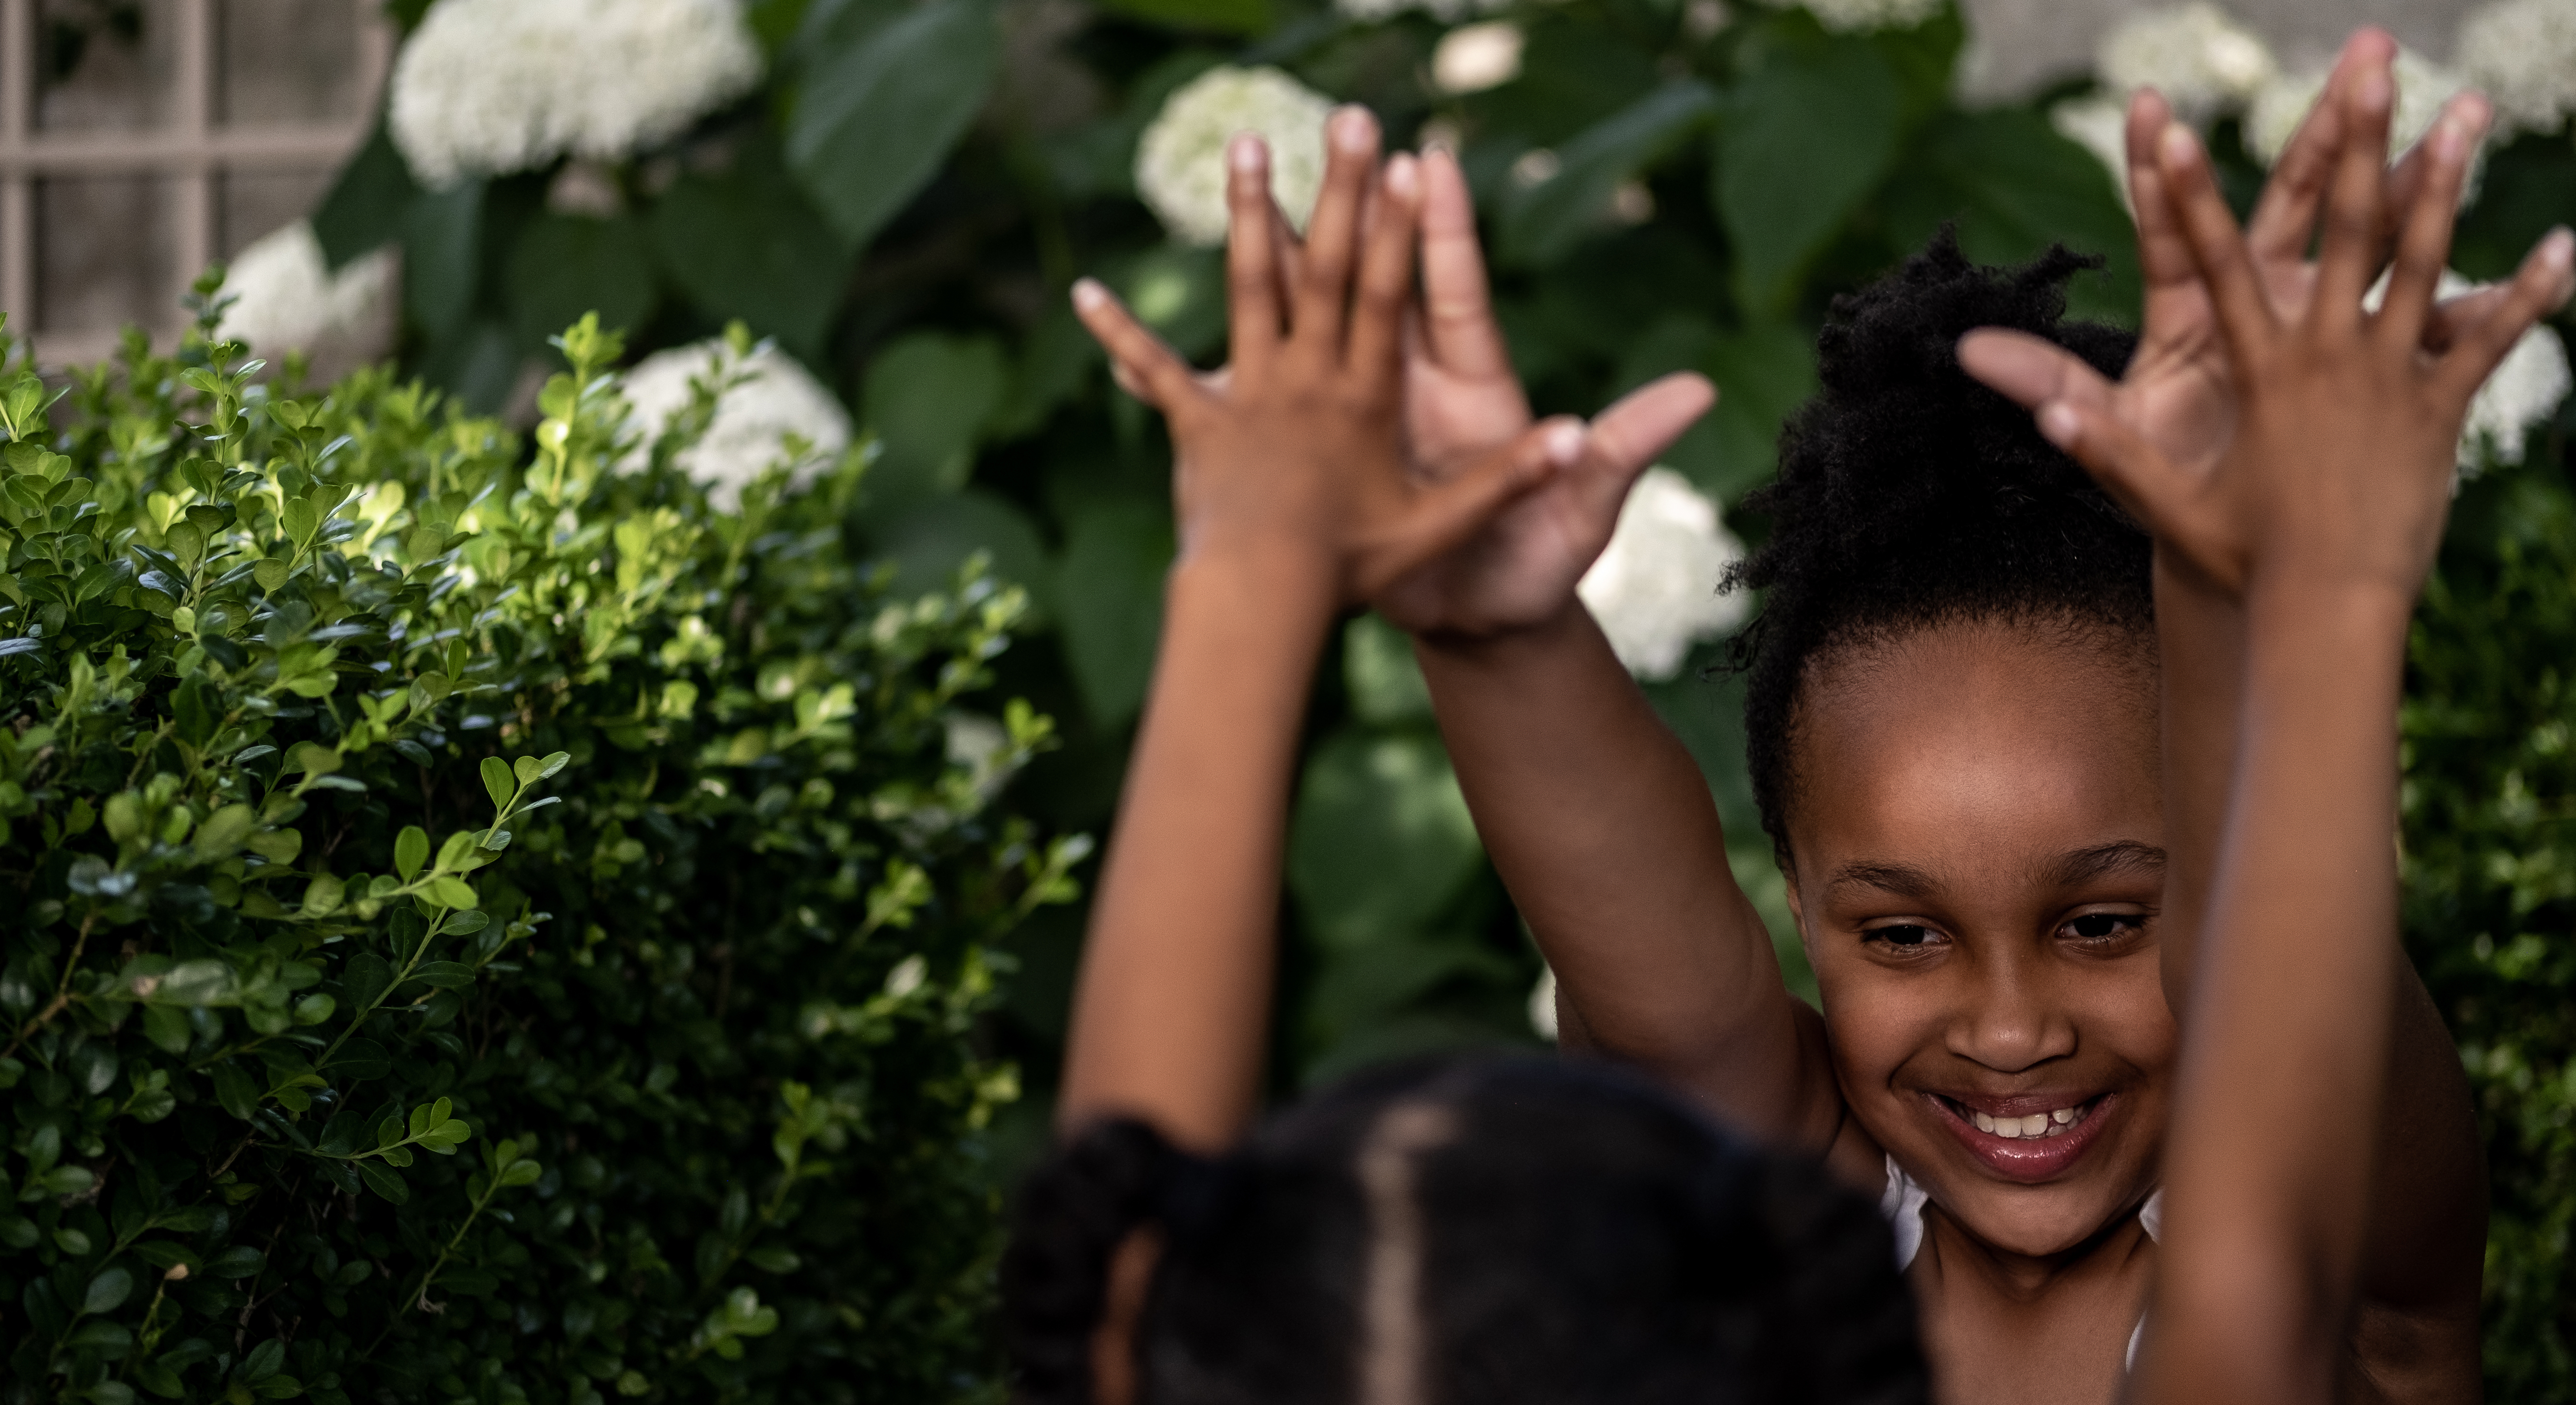 Two children with medium brown skin and dark hair; they are surrounded by greenery and facing each other with their arms raised and fingertips touching.